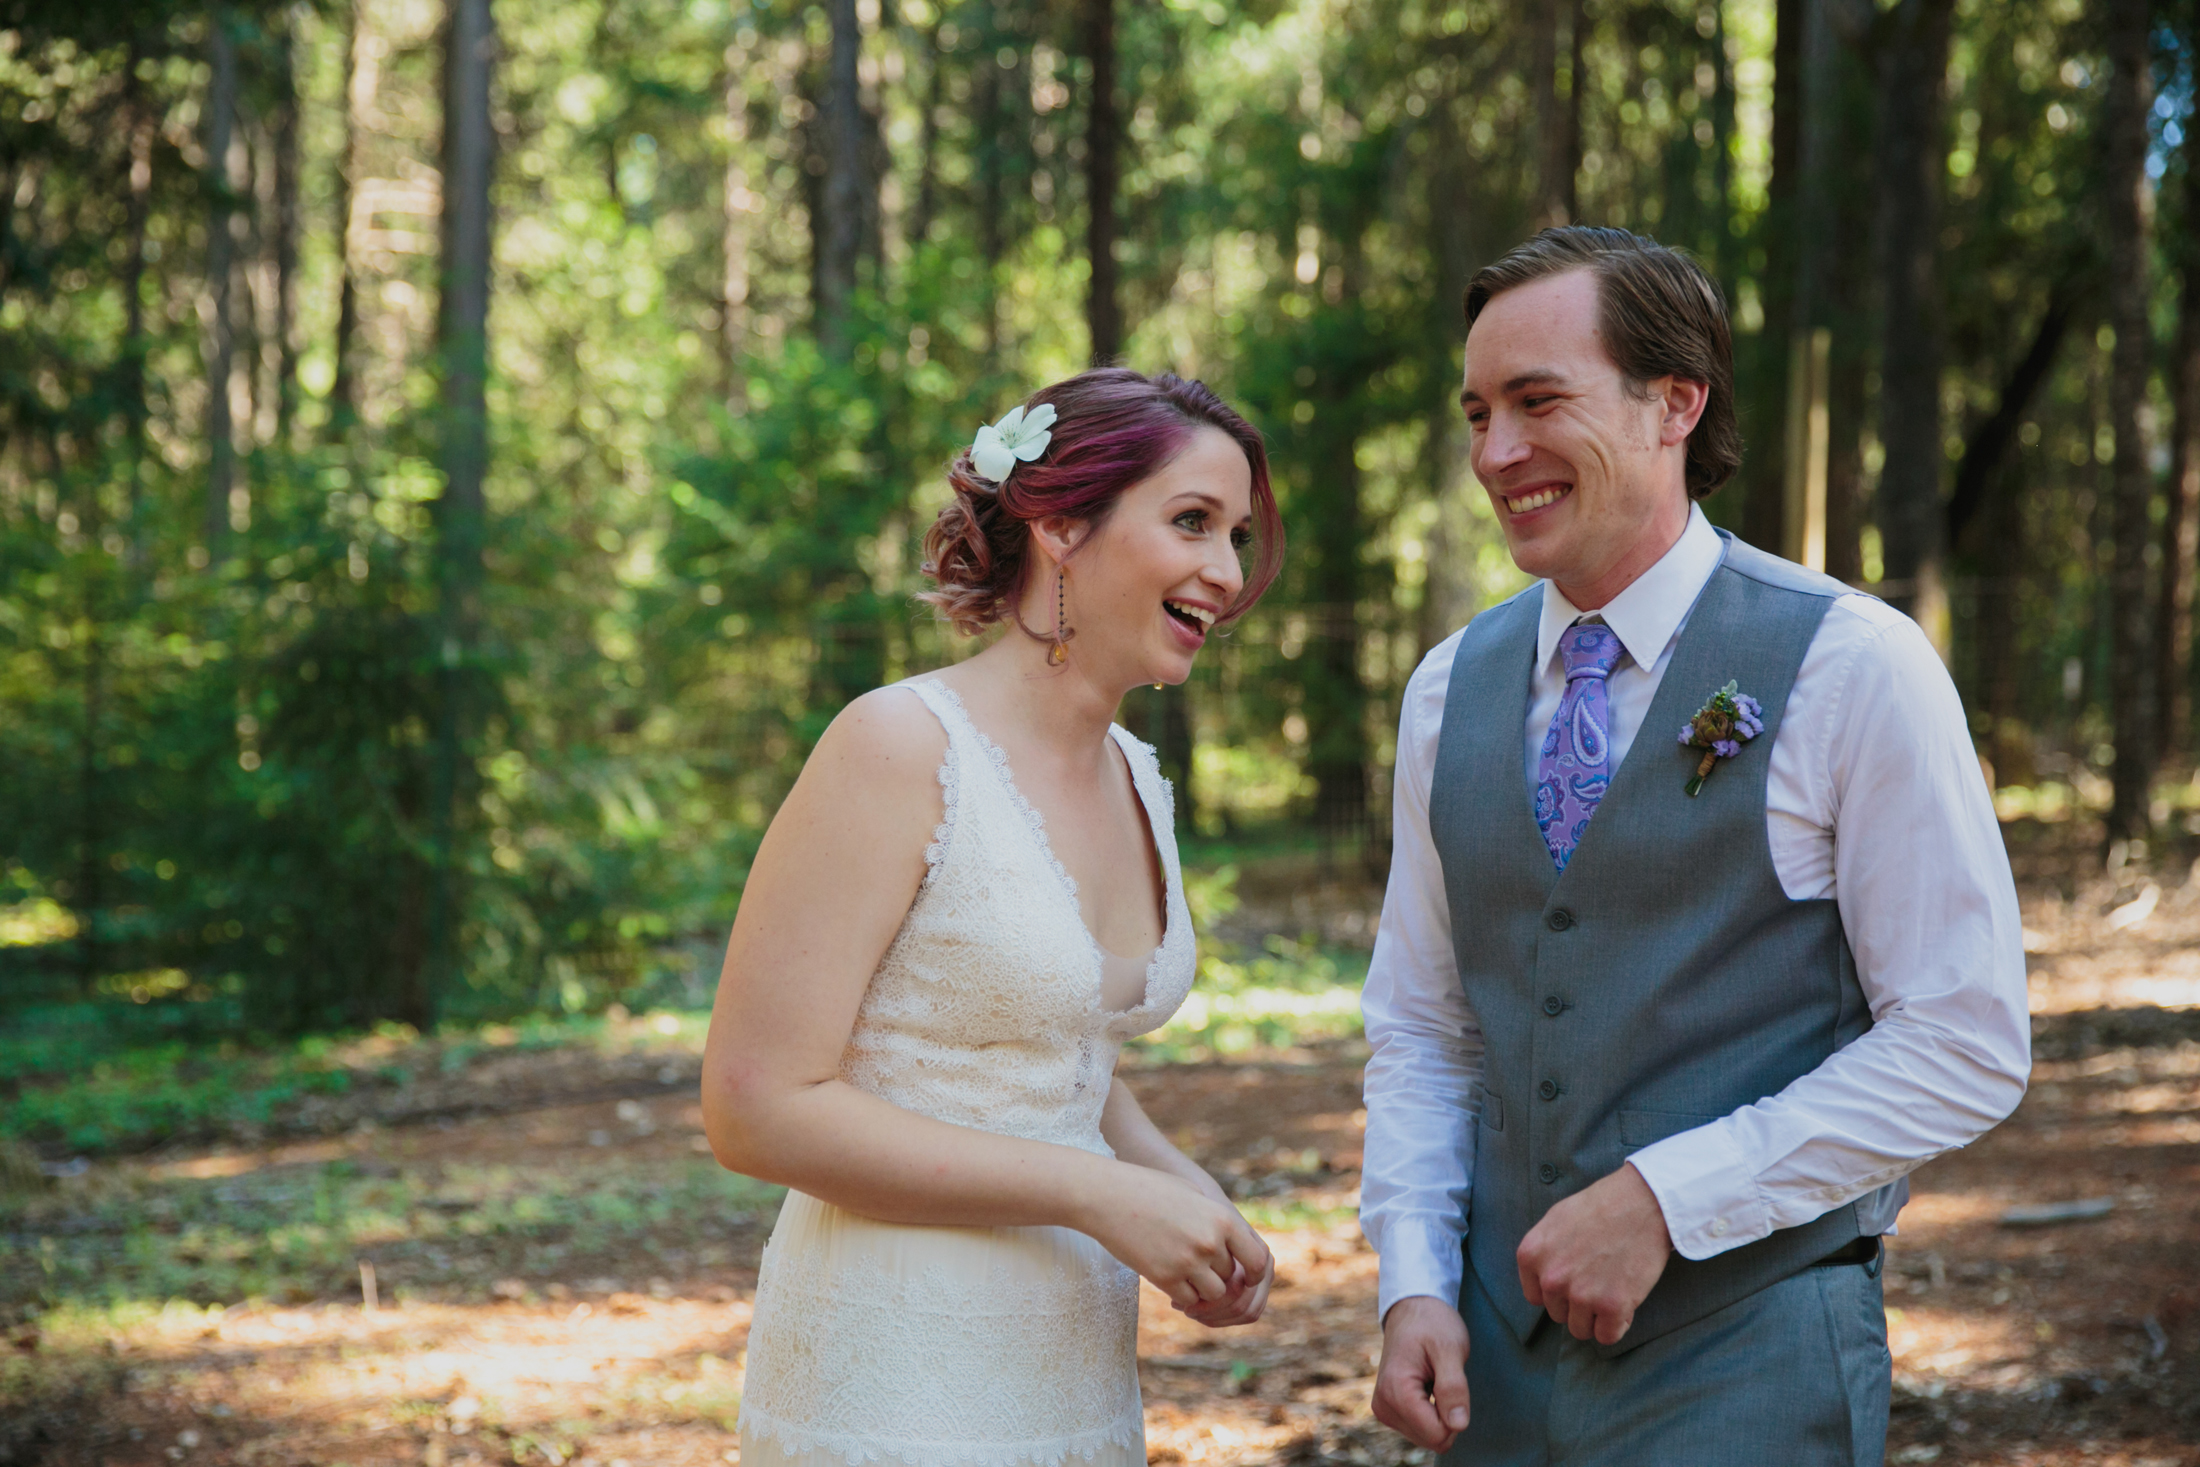 Bride and groom laughing in the woods.